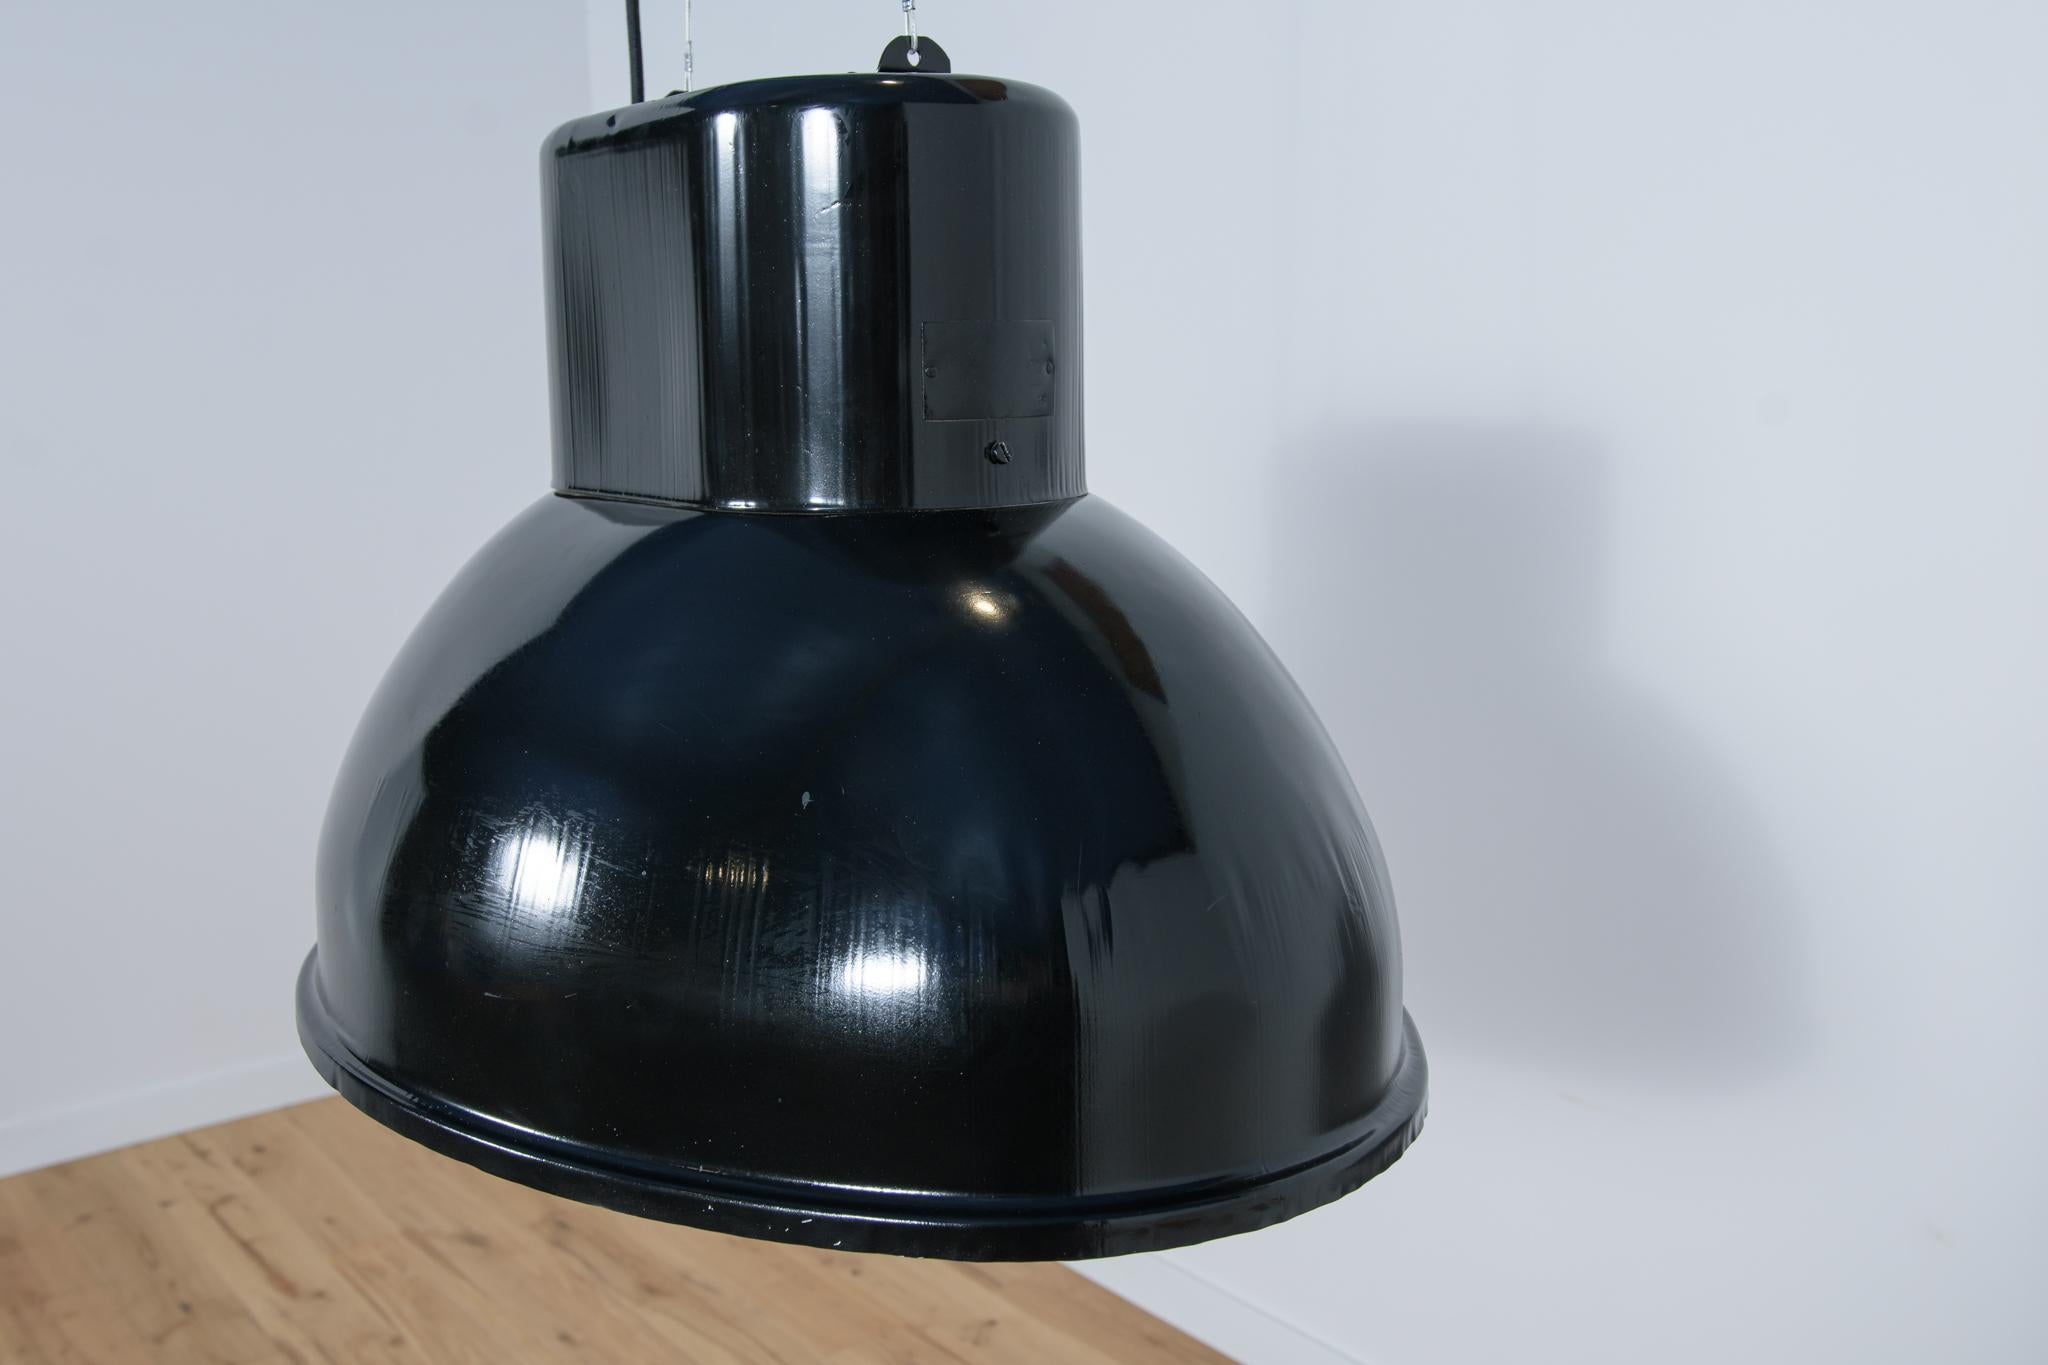 Polish Large Industrial Lamp Uboot, Mesko, Poland, 1970s For Sale